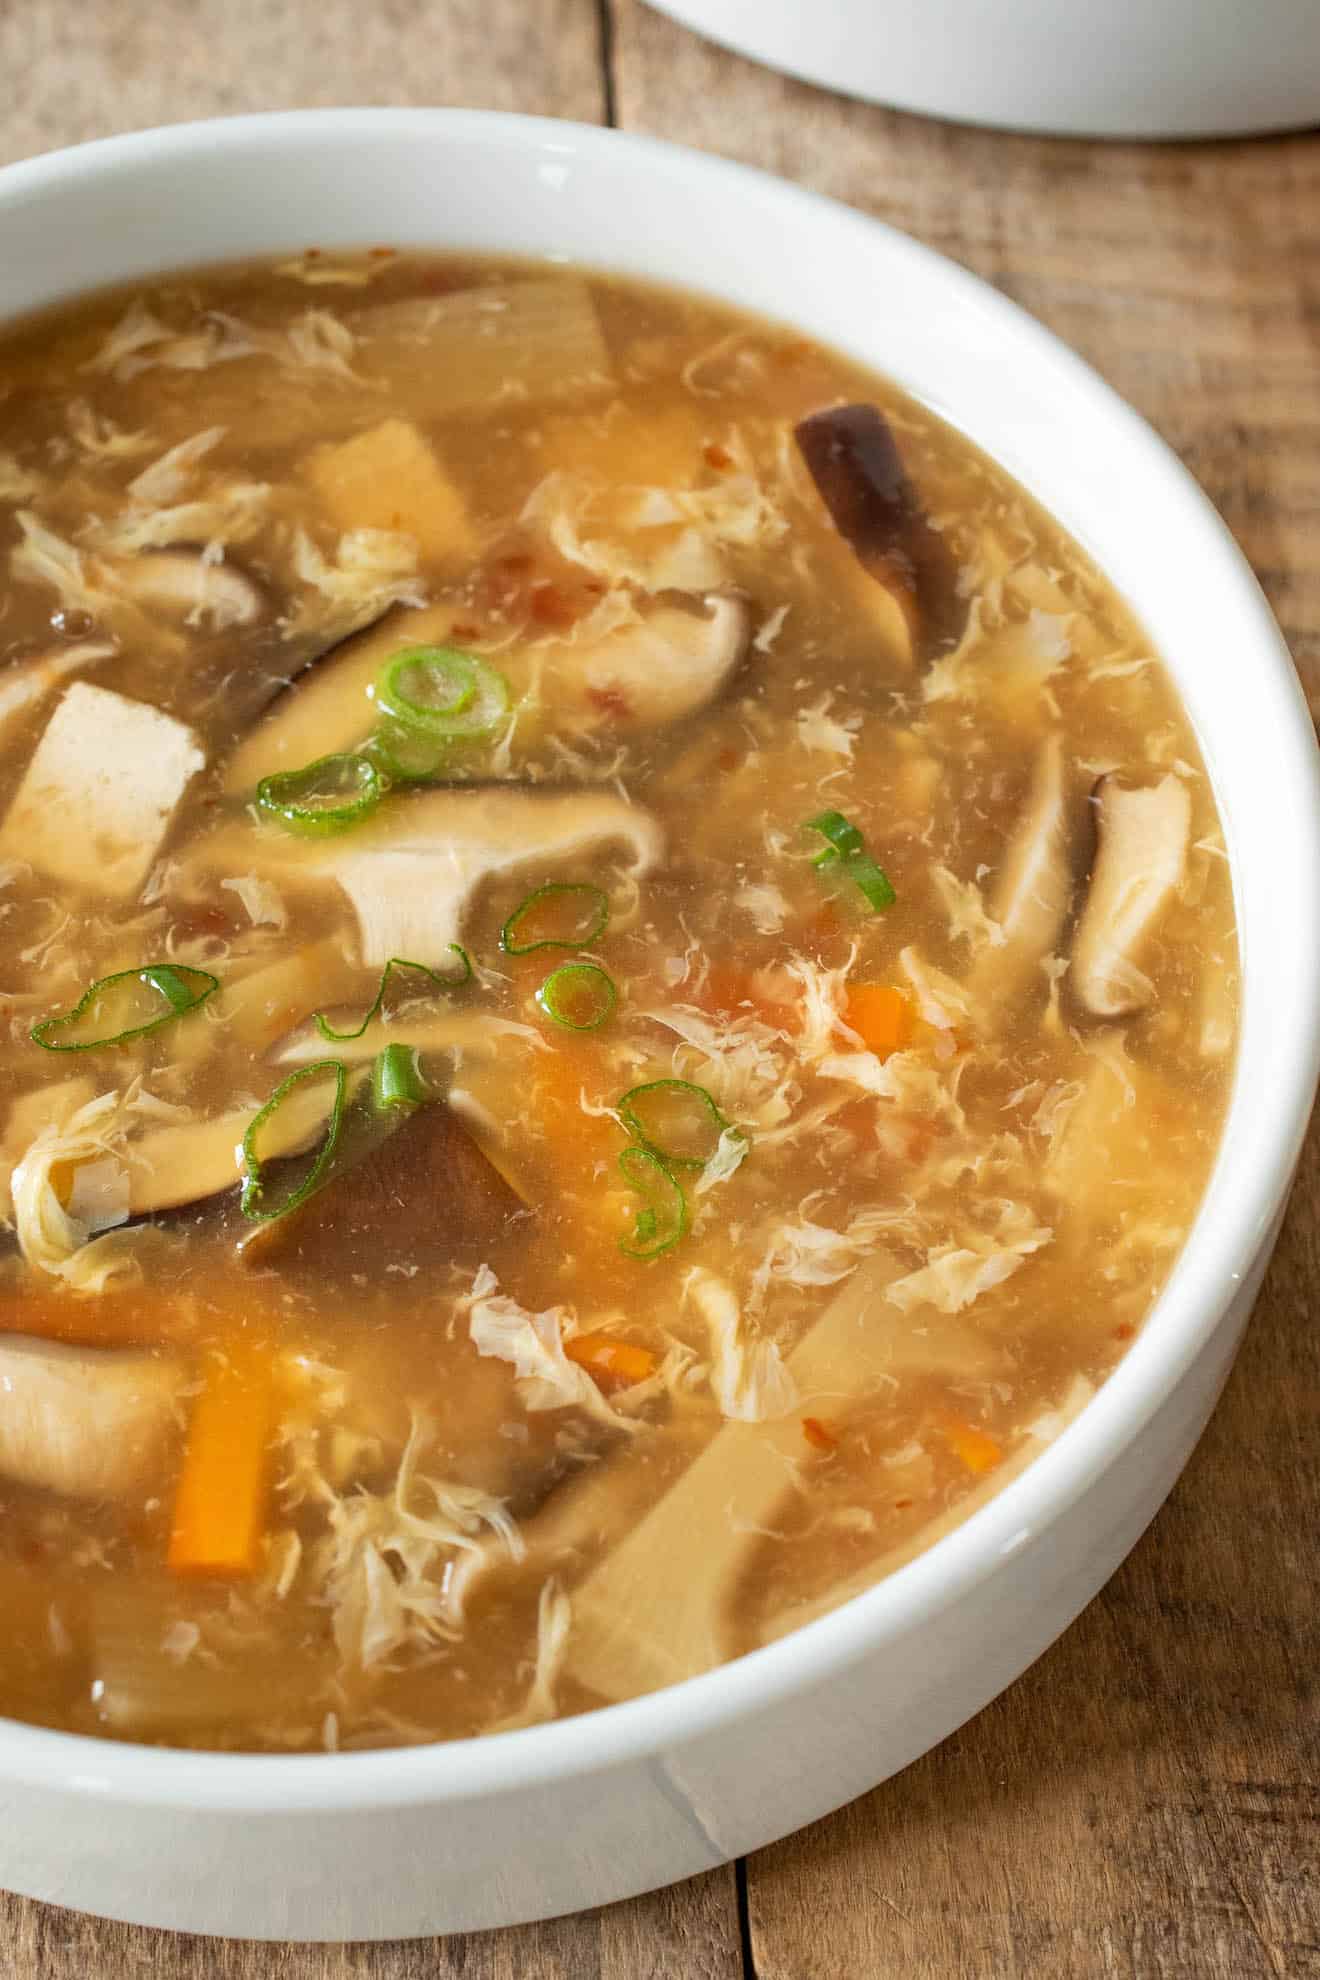 A closeup of the soup showing the mushrooms, tofu and vegetables